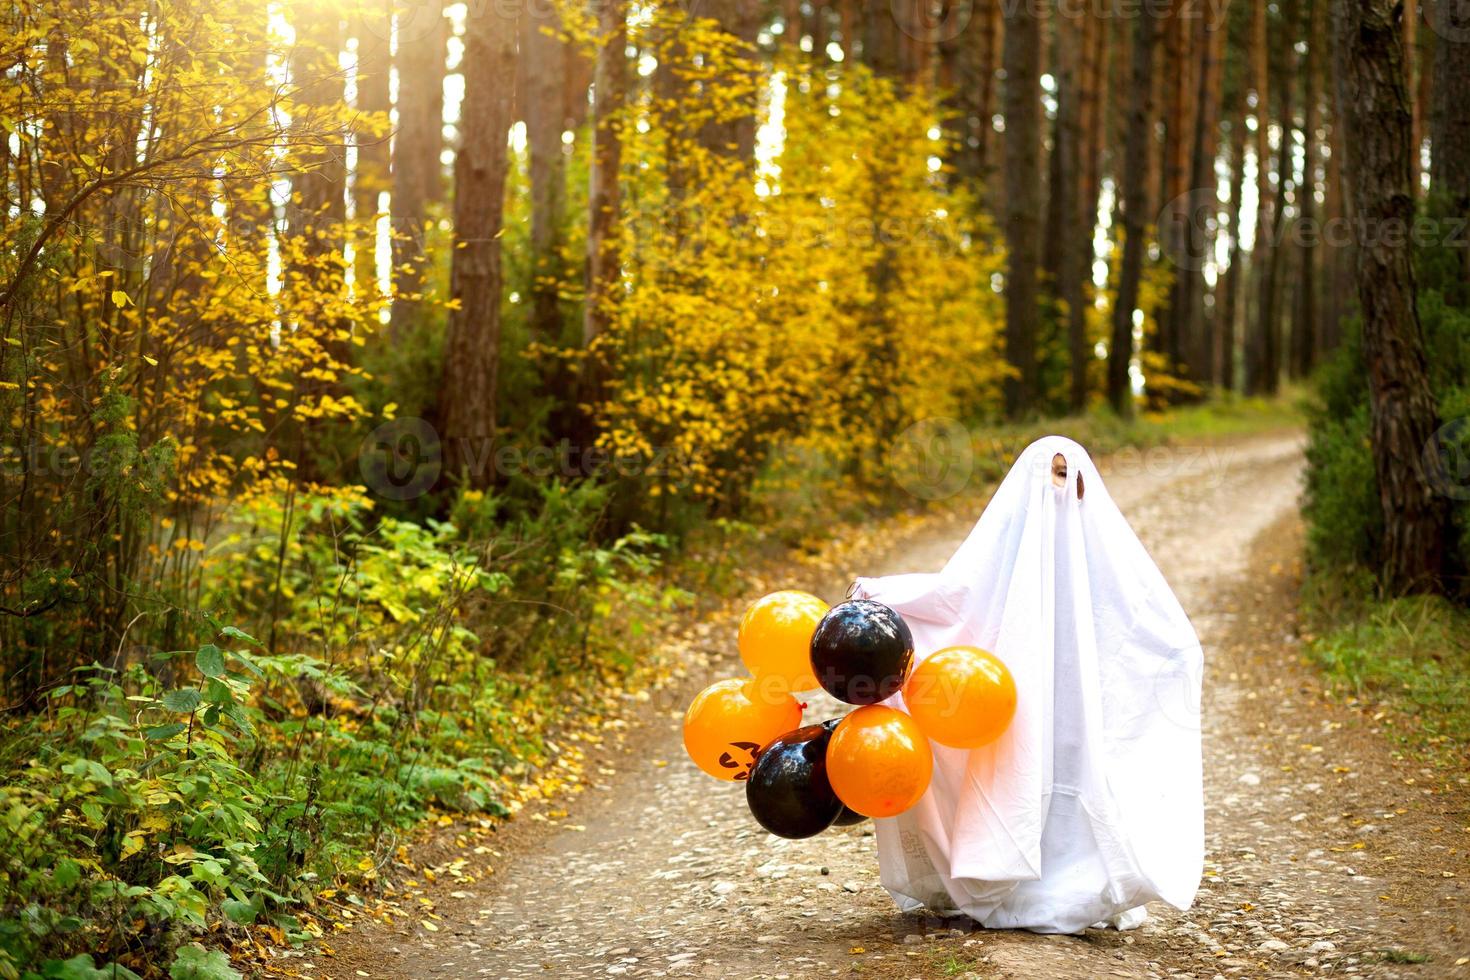 A child in sheets with slits like a ghost costume in an autumn forest with orange and black balls scares. Halloween Party photo